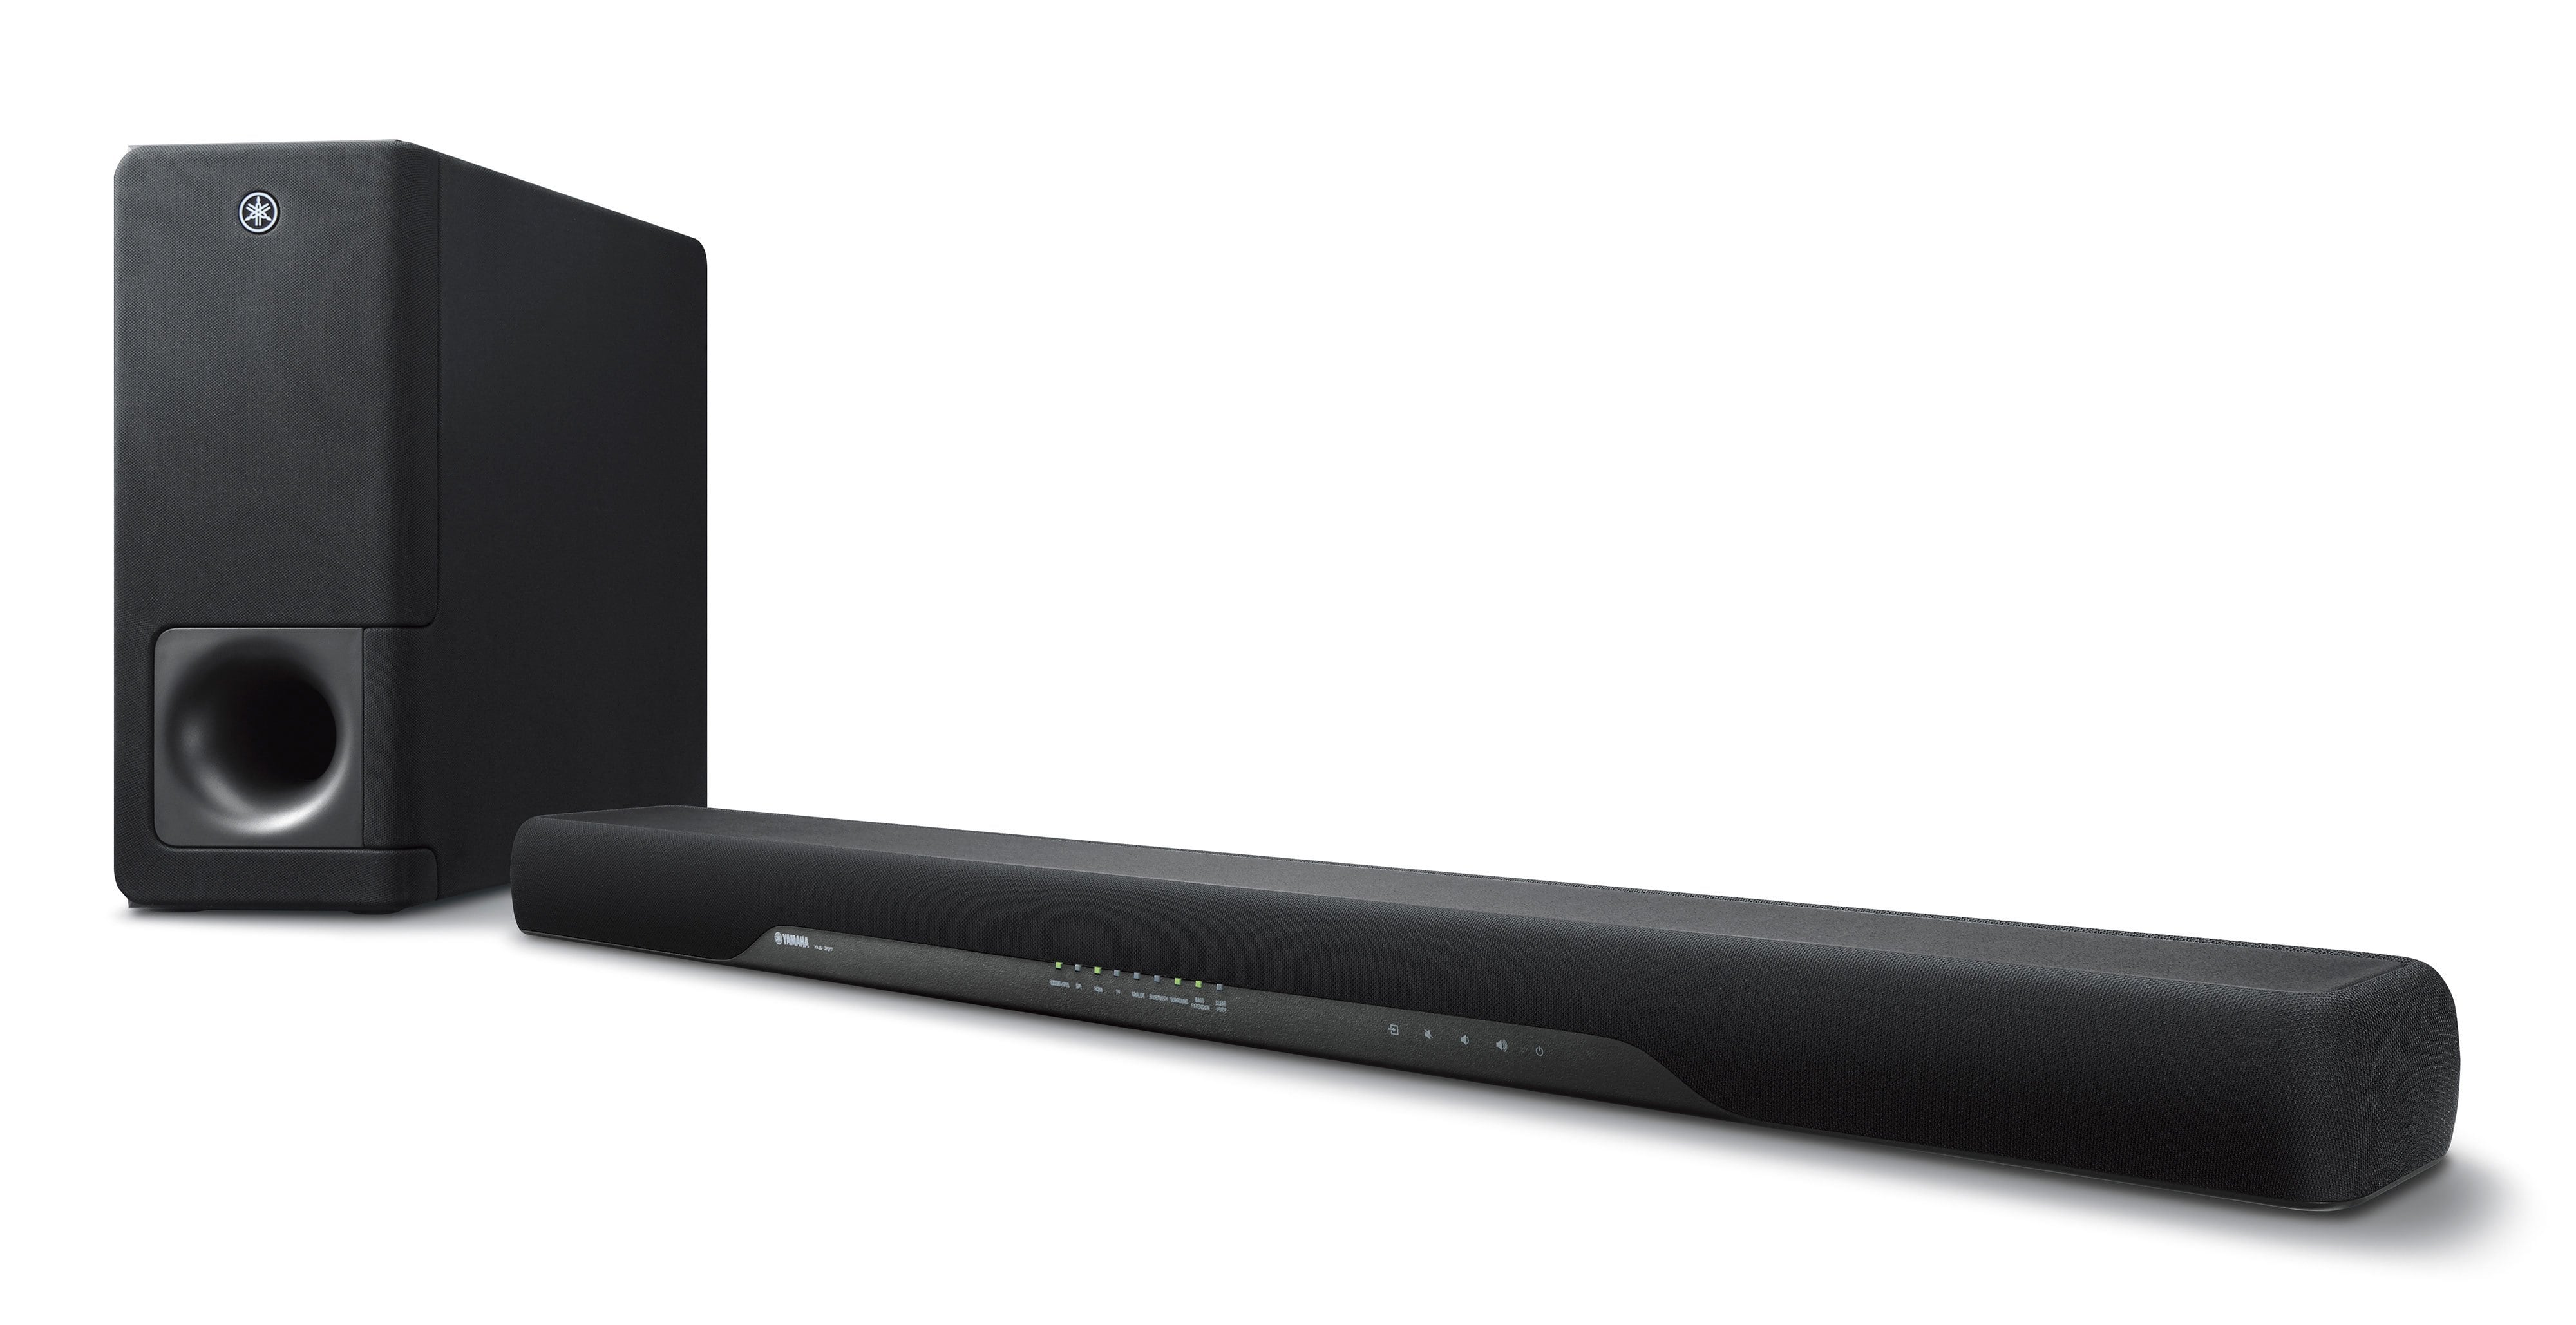 YAS-207 - Overview - Sound Bar - Audio 